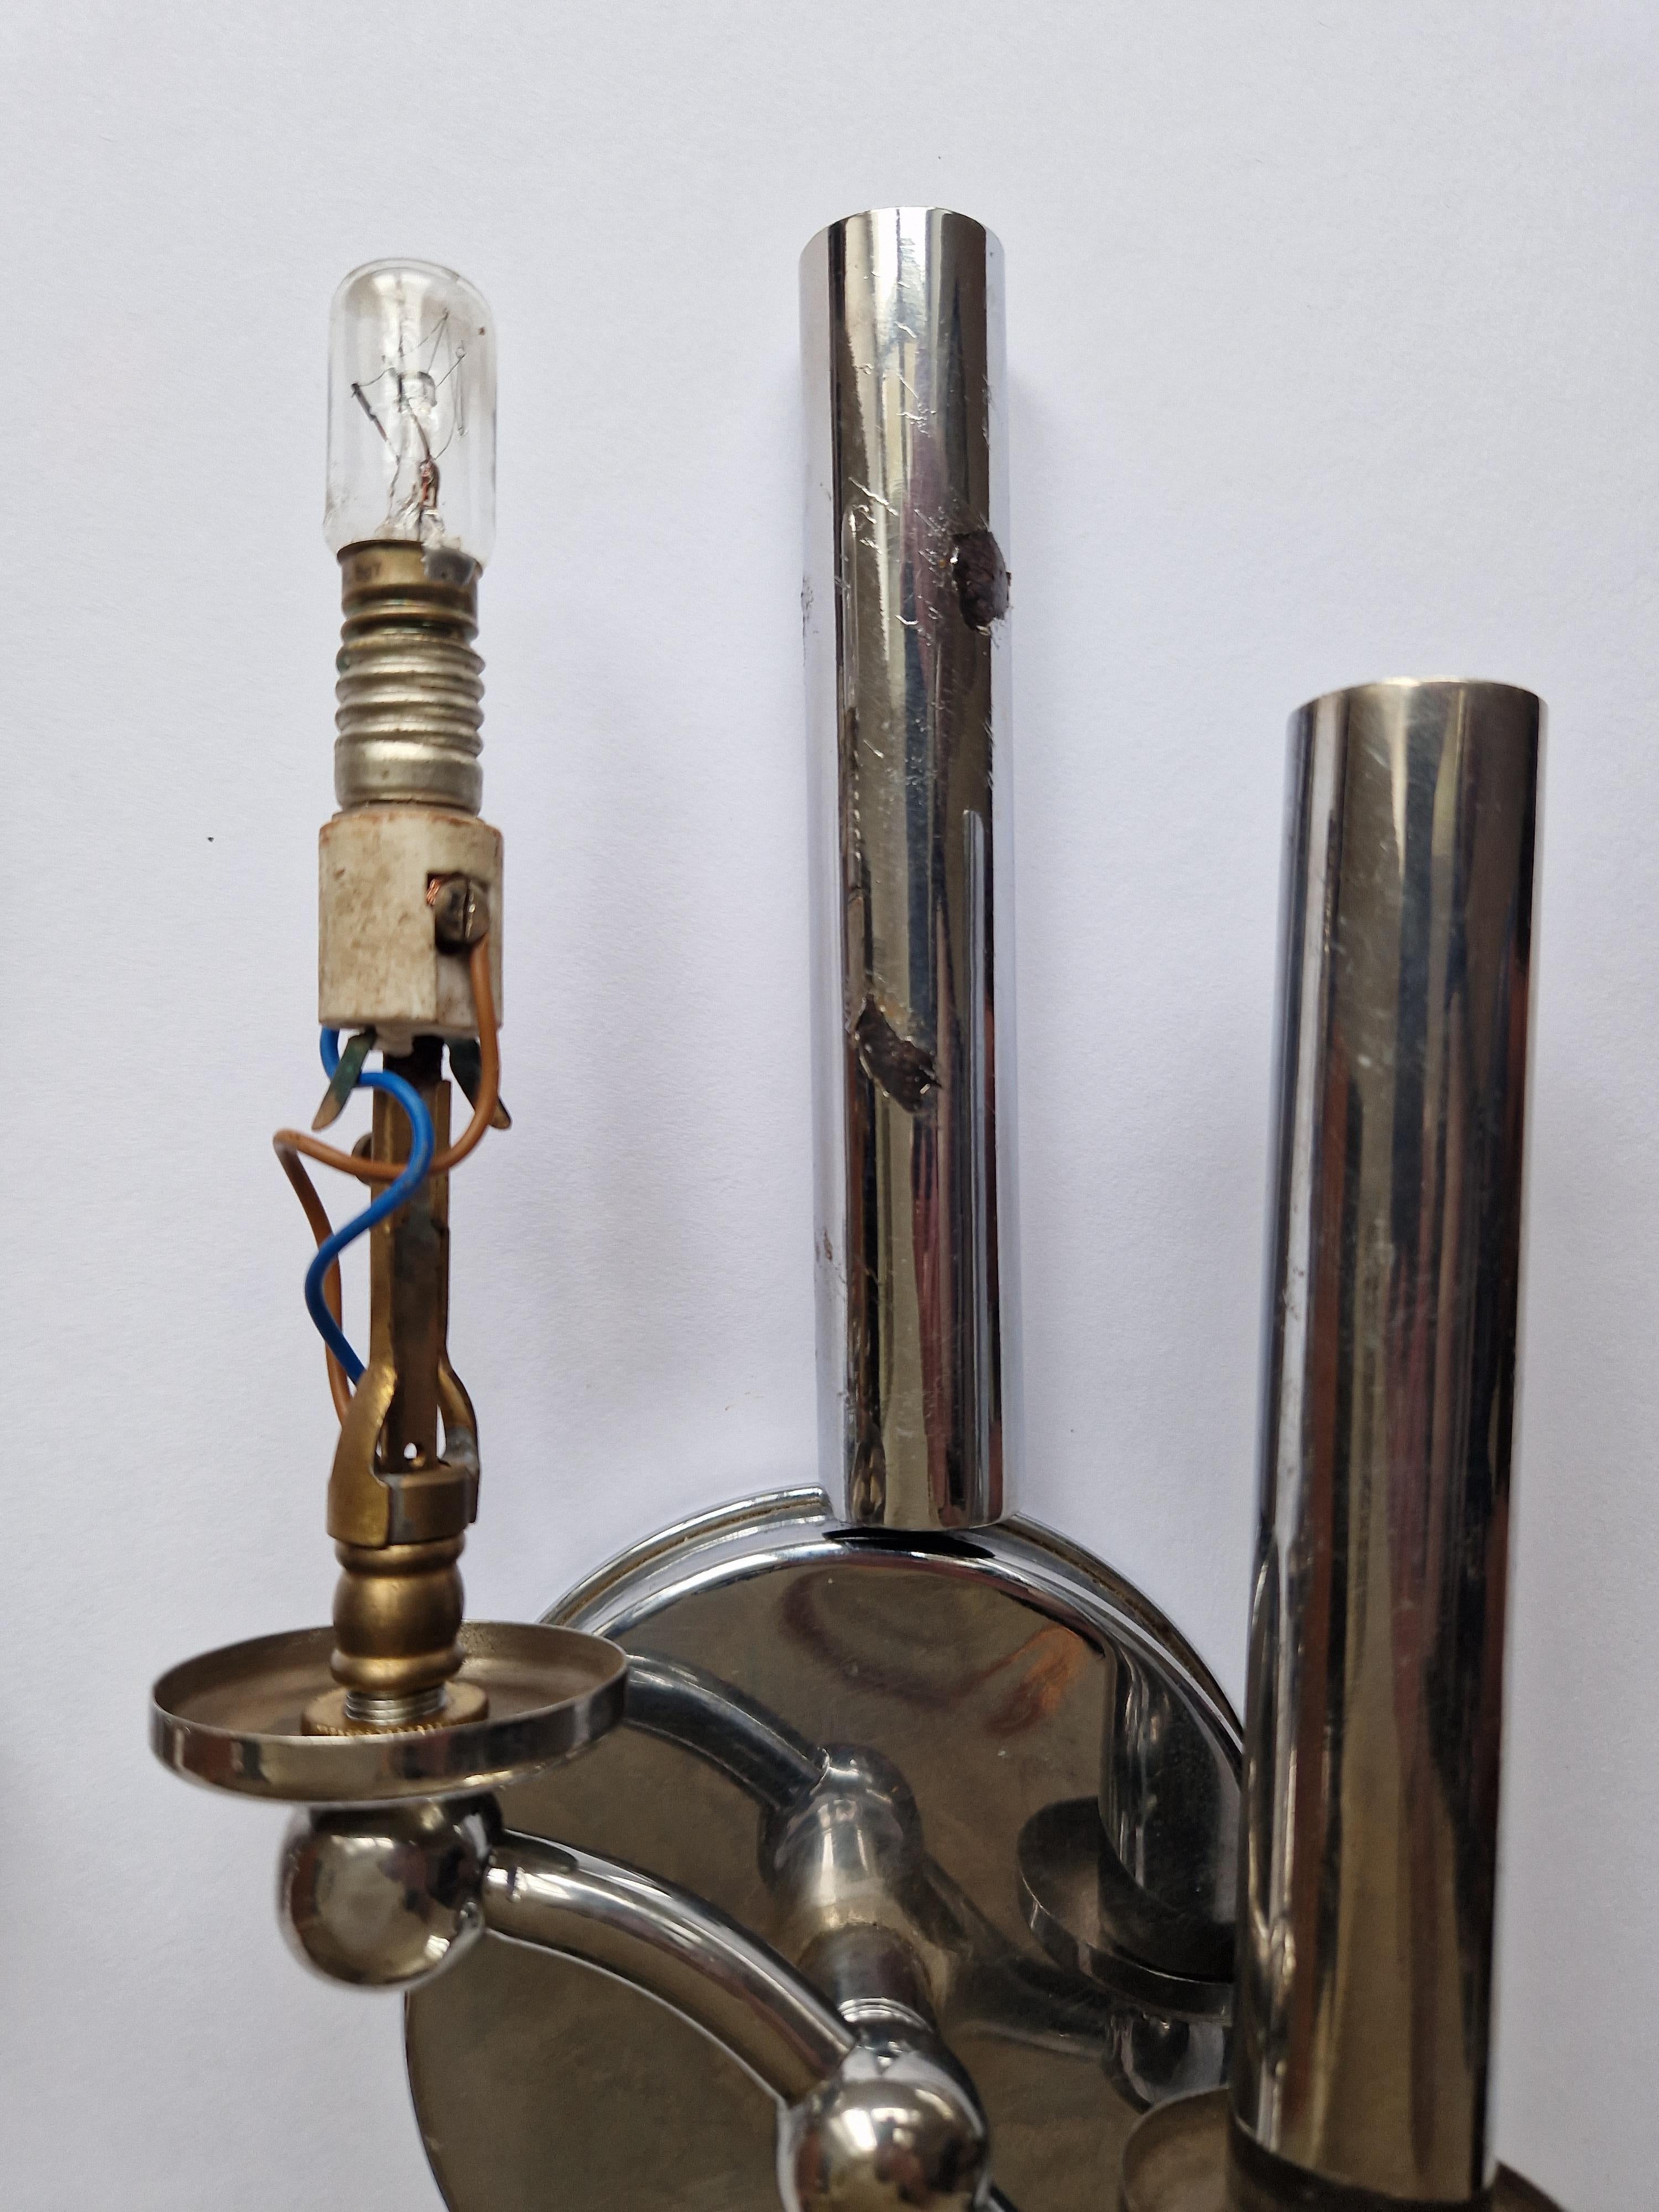 Pair of Rare Chrome Art Deco / Functionalism Wall Lamps, 1930s For Sale 6